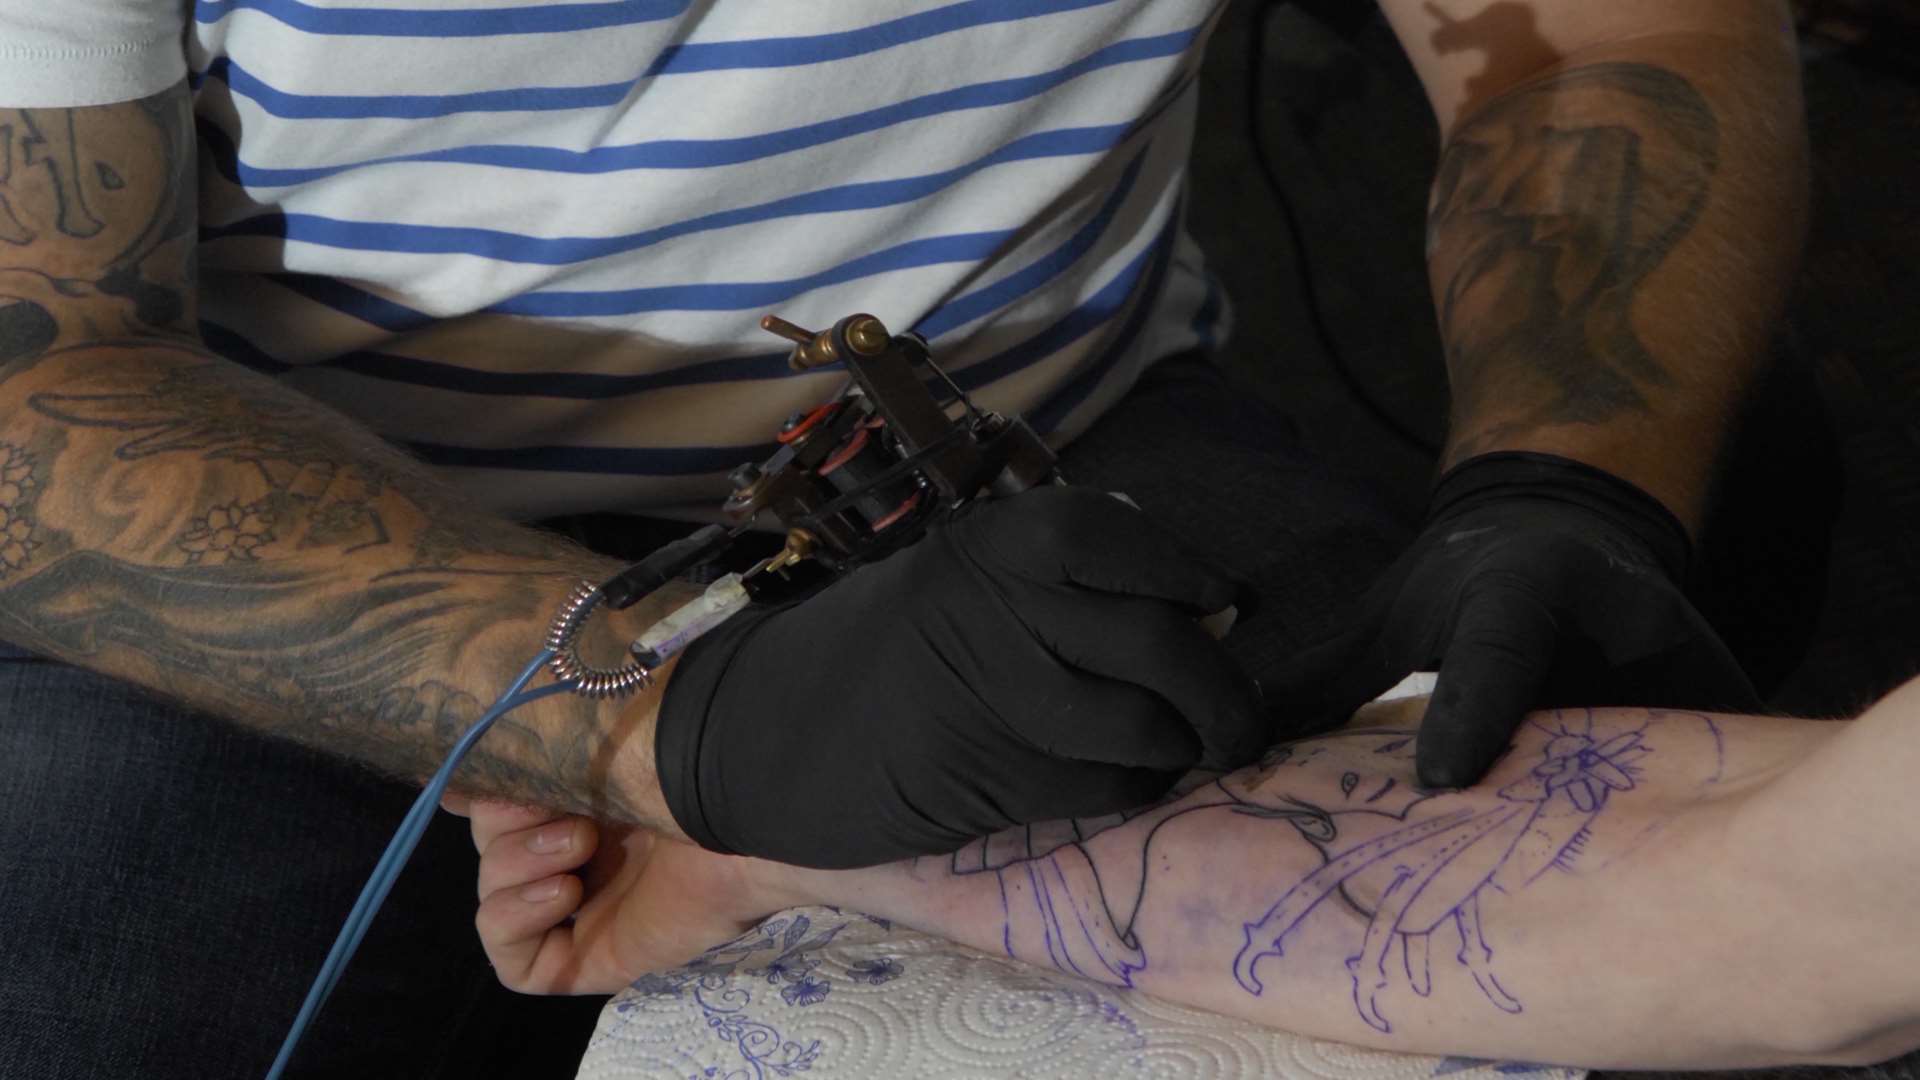 Tattoo artist, Tom Rosewell, is offering a day's worth of tattooing